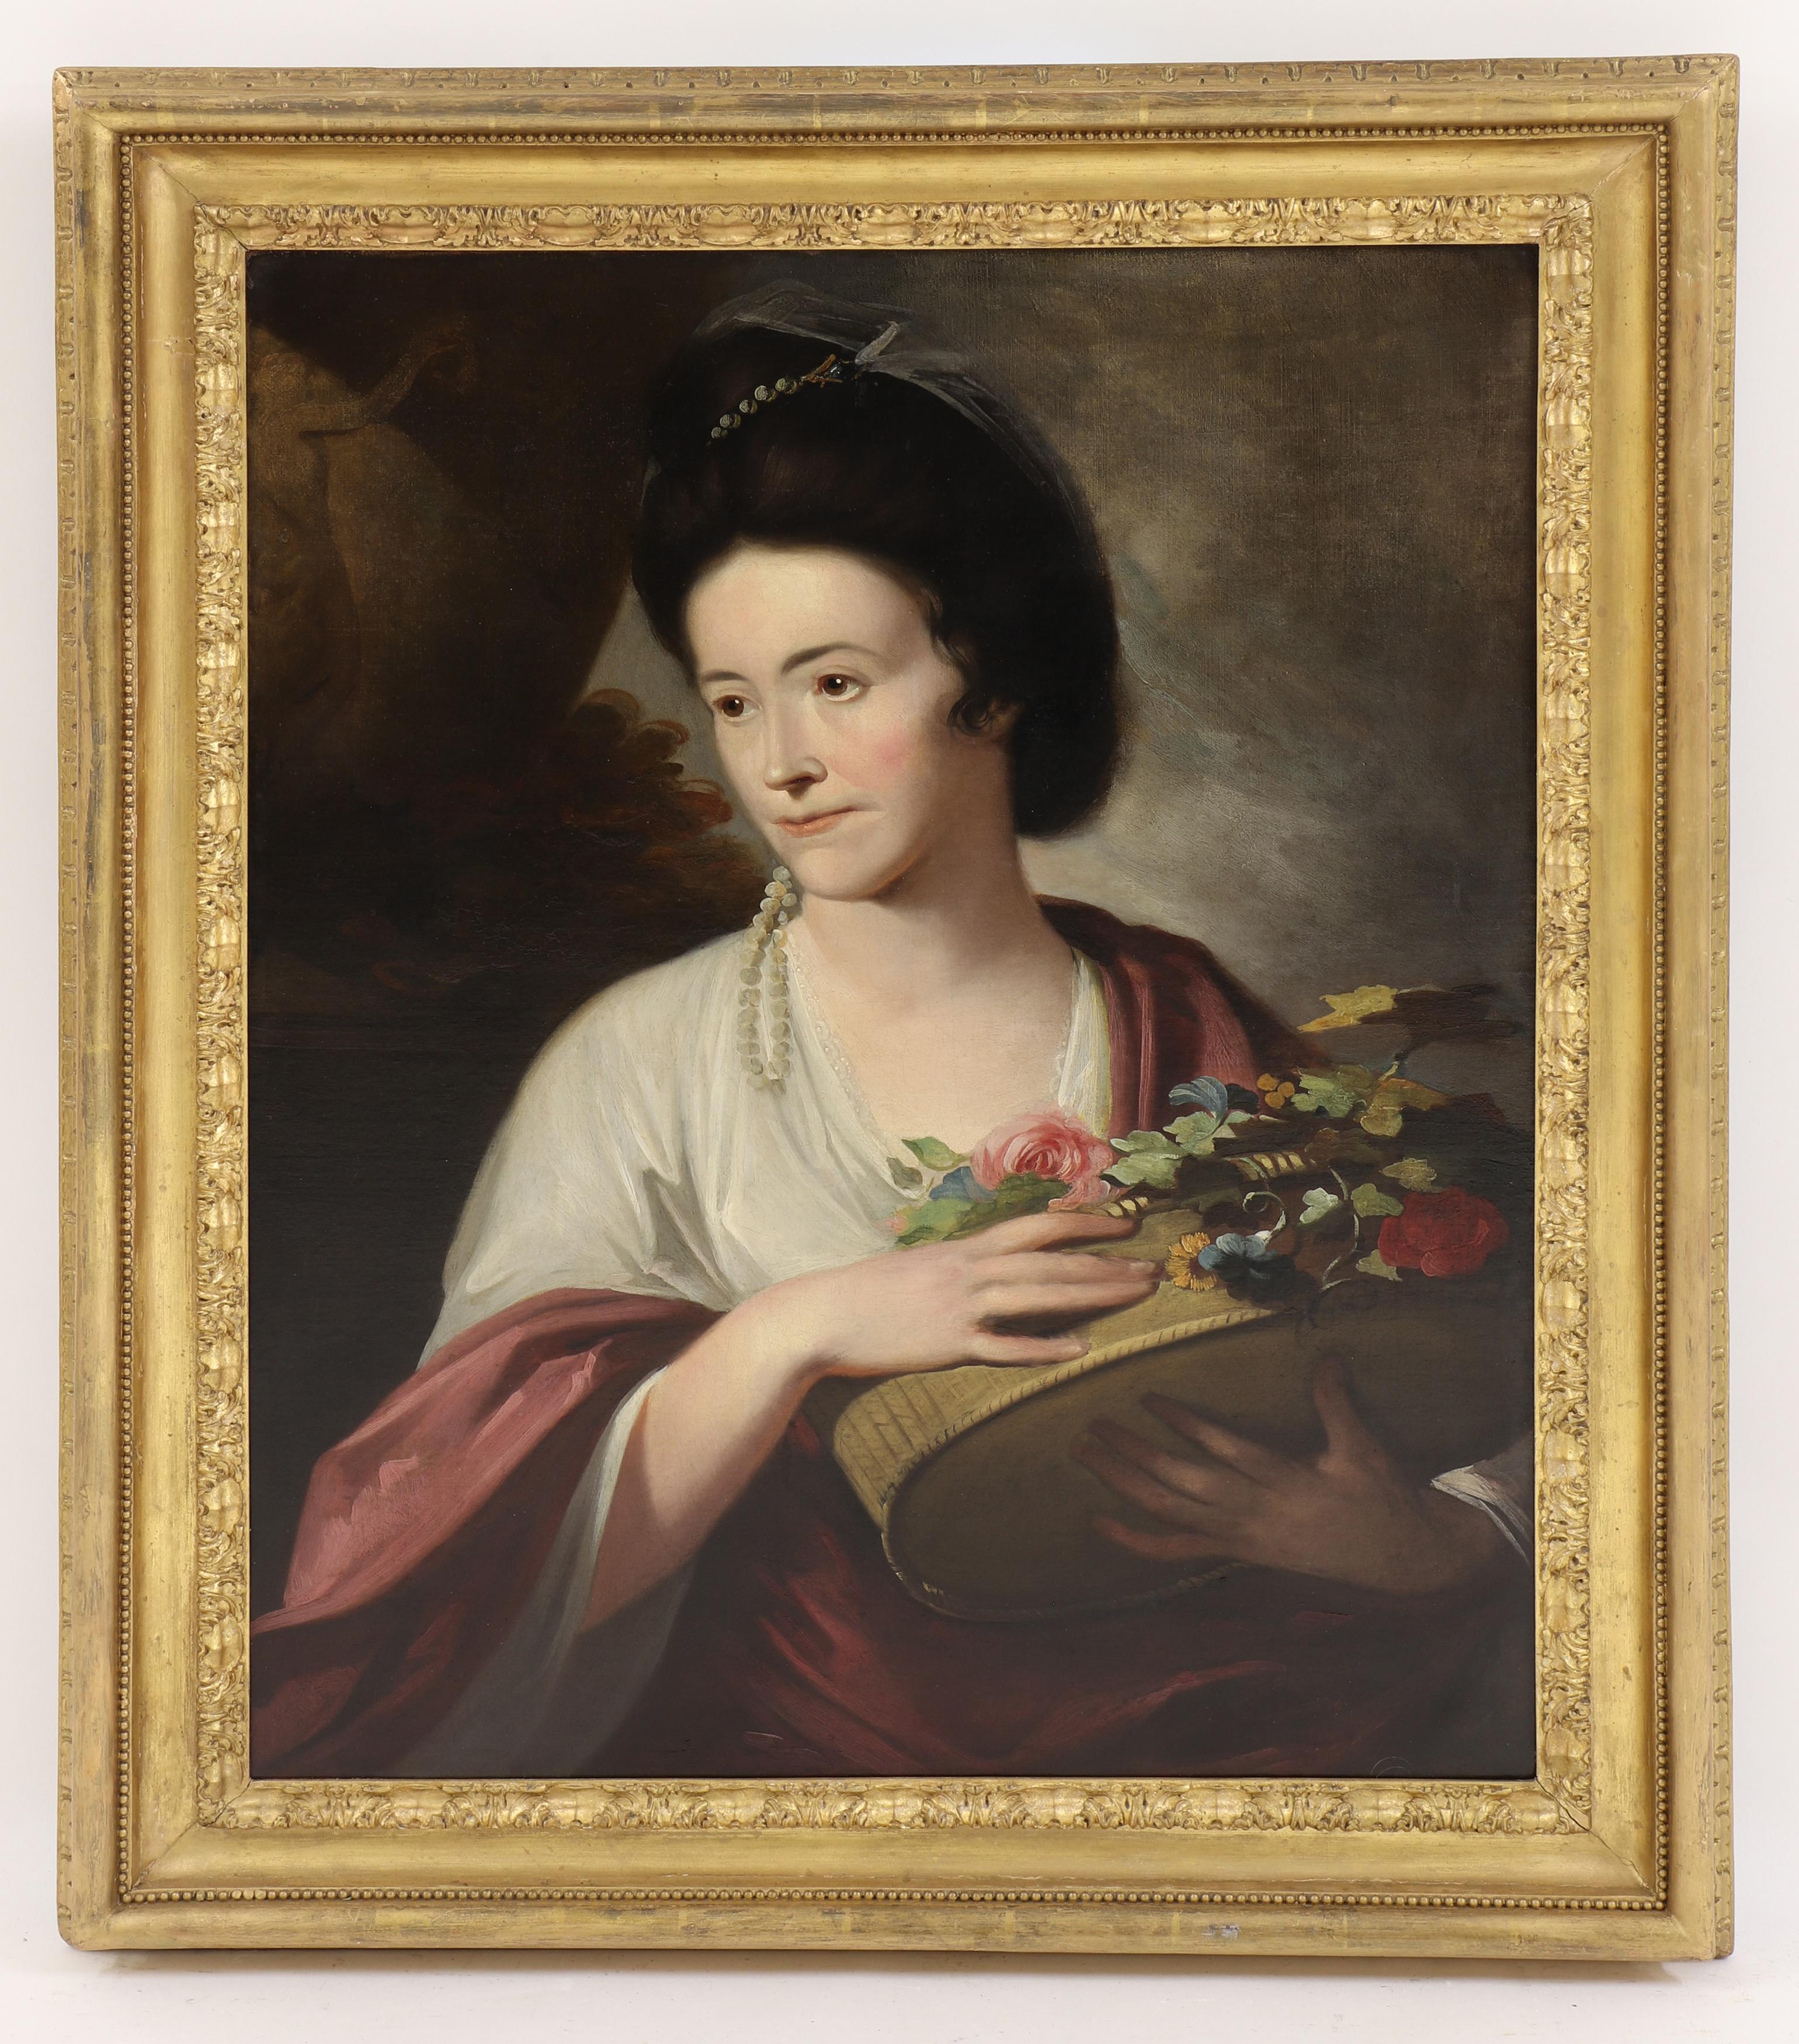 Tilly Kettle Portrait Painting - 18th century English portrait of a lady beside an urn, with a basket of flowers